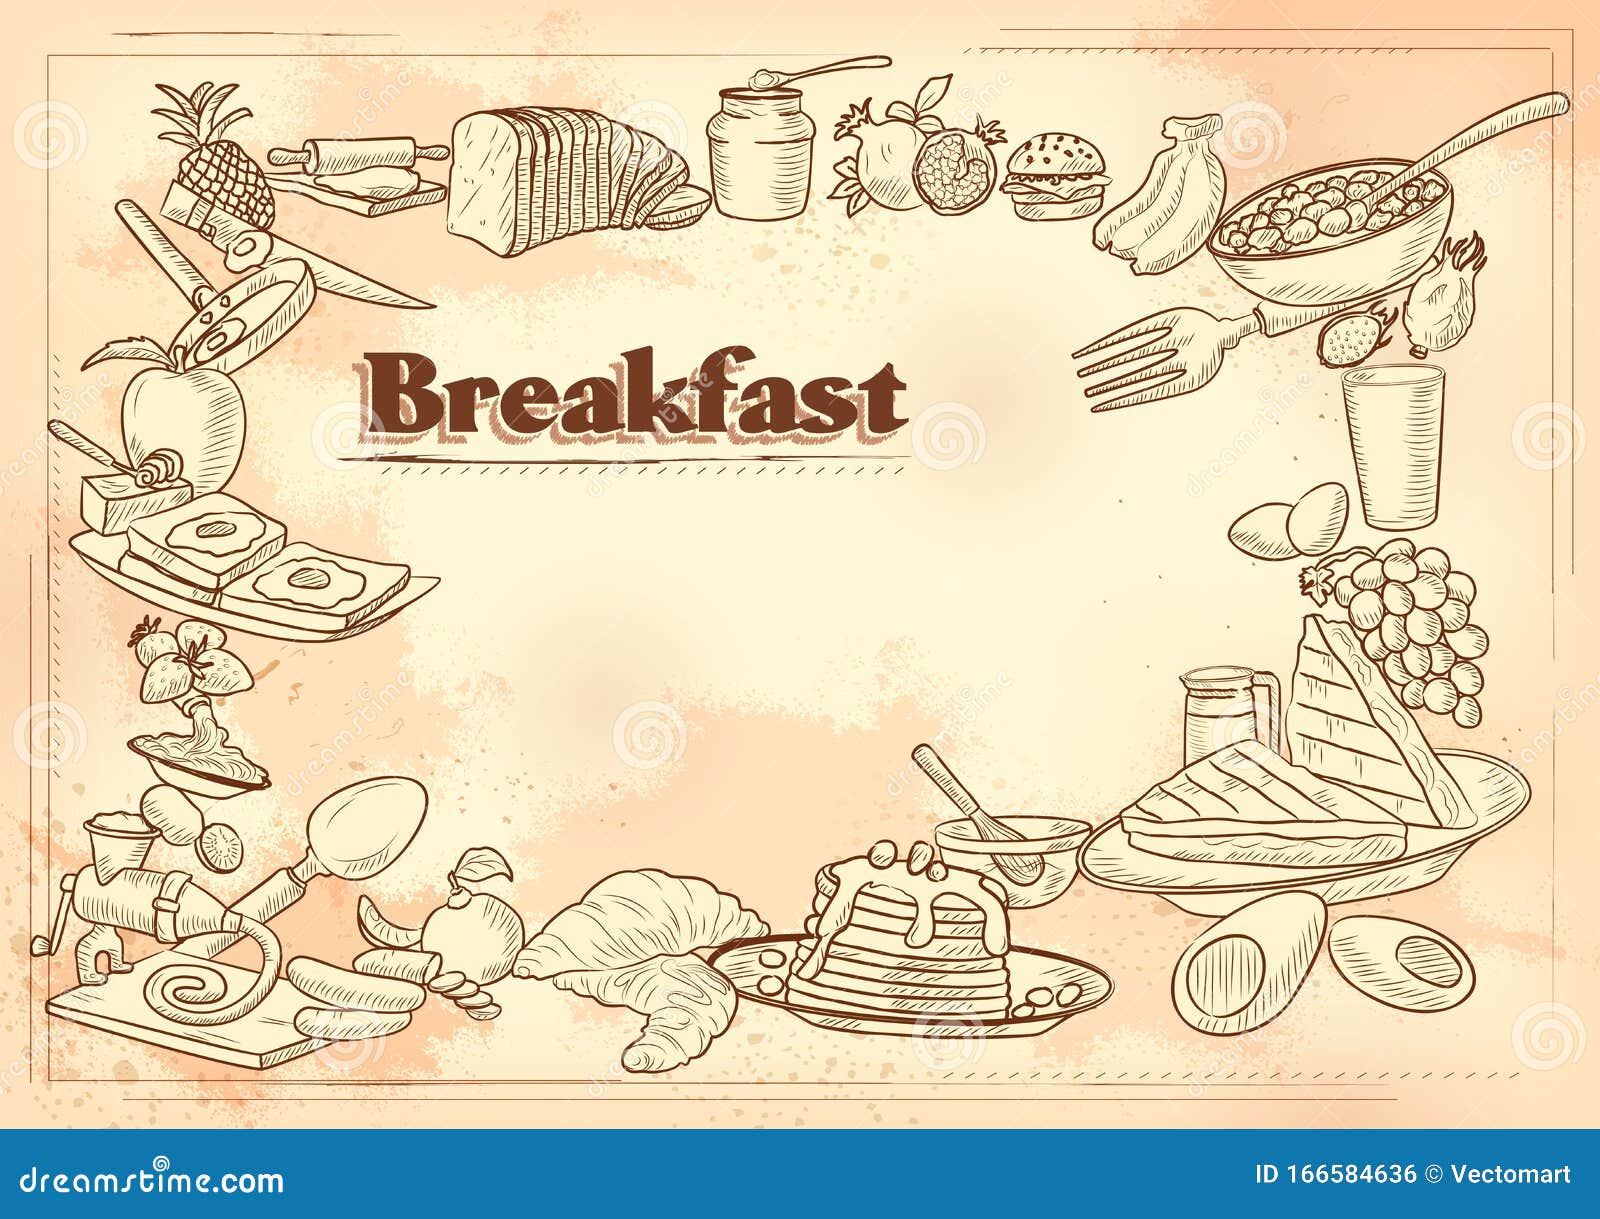 Template Of Different Types Of Breakfast Item For Menu Background